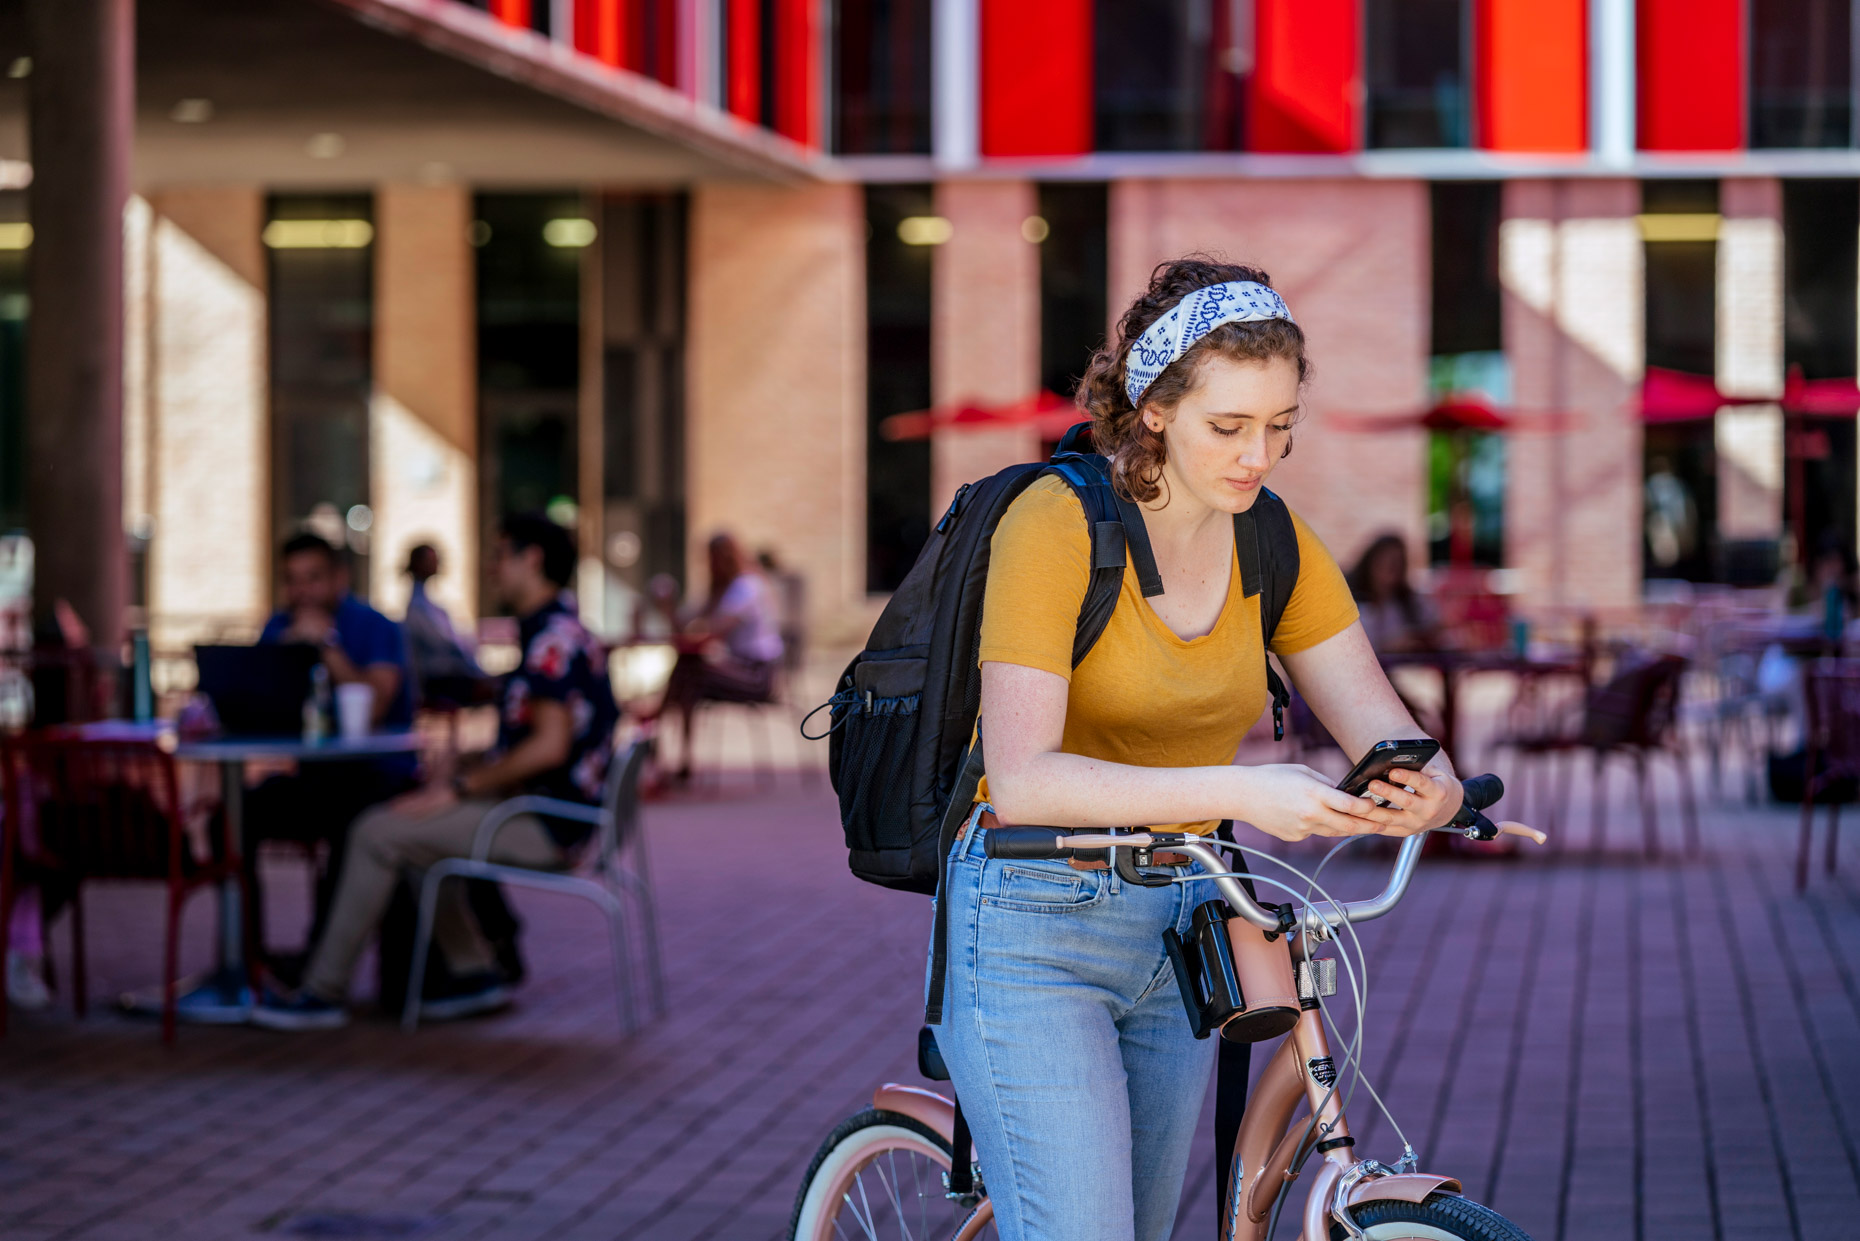 Woman on college campus resting with arms on bike handles texting on phone